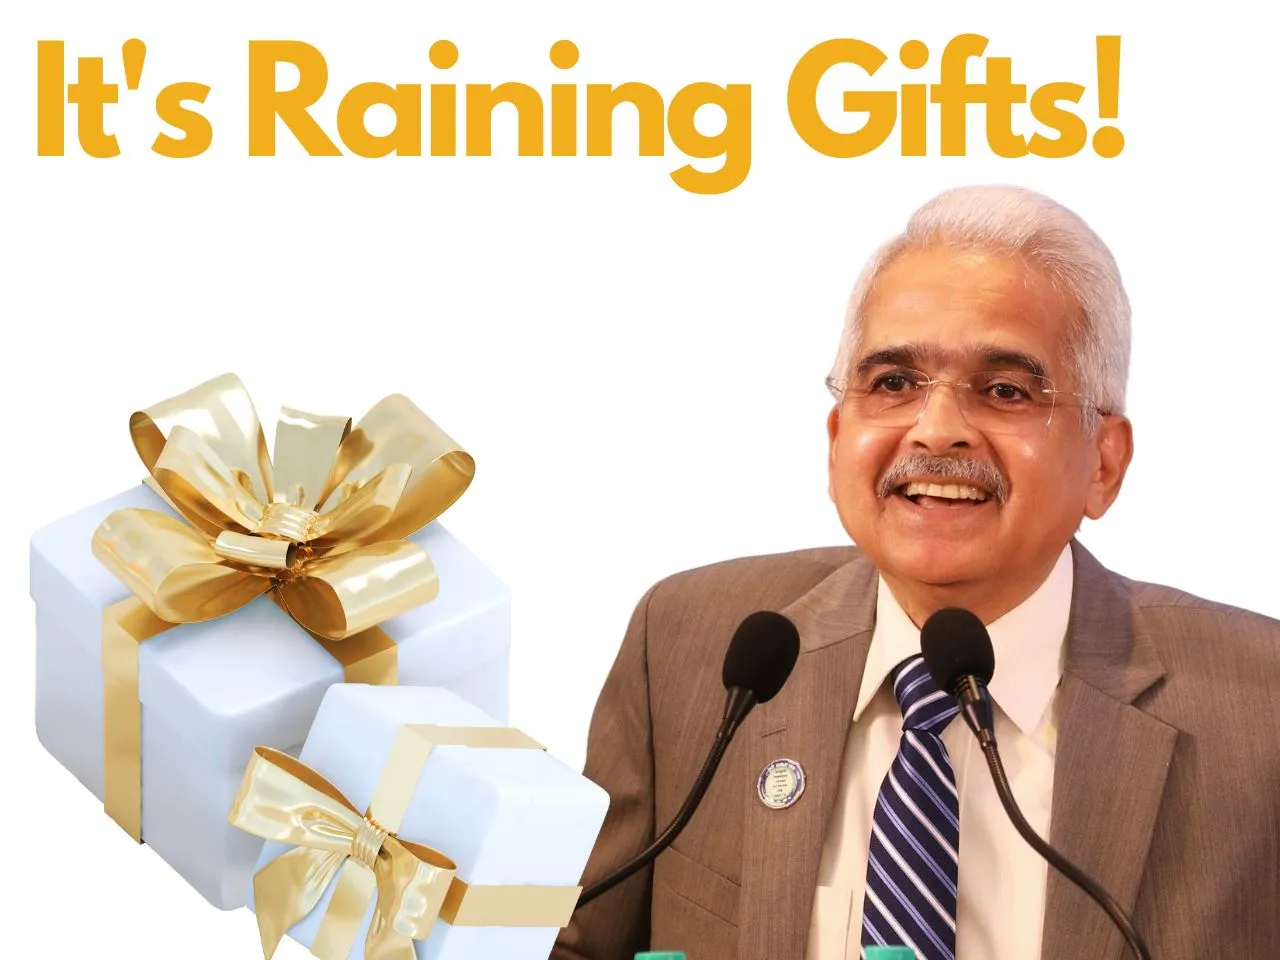 RBI Has Some Gifting Ideas: Have A Look